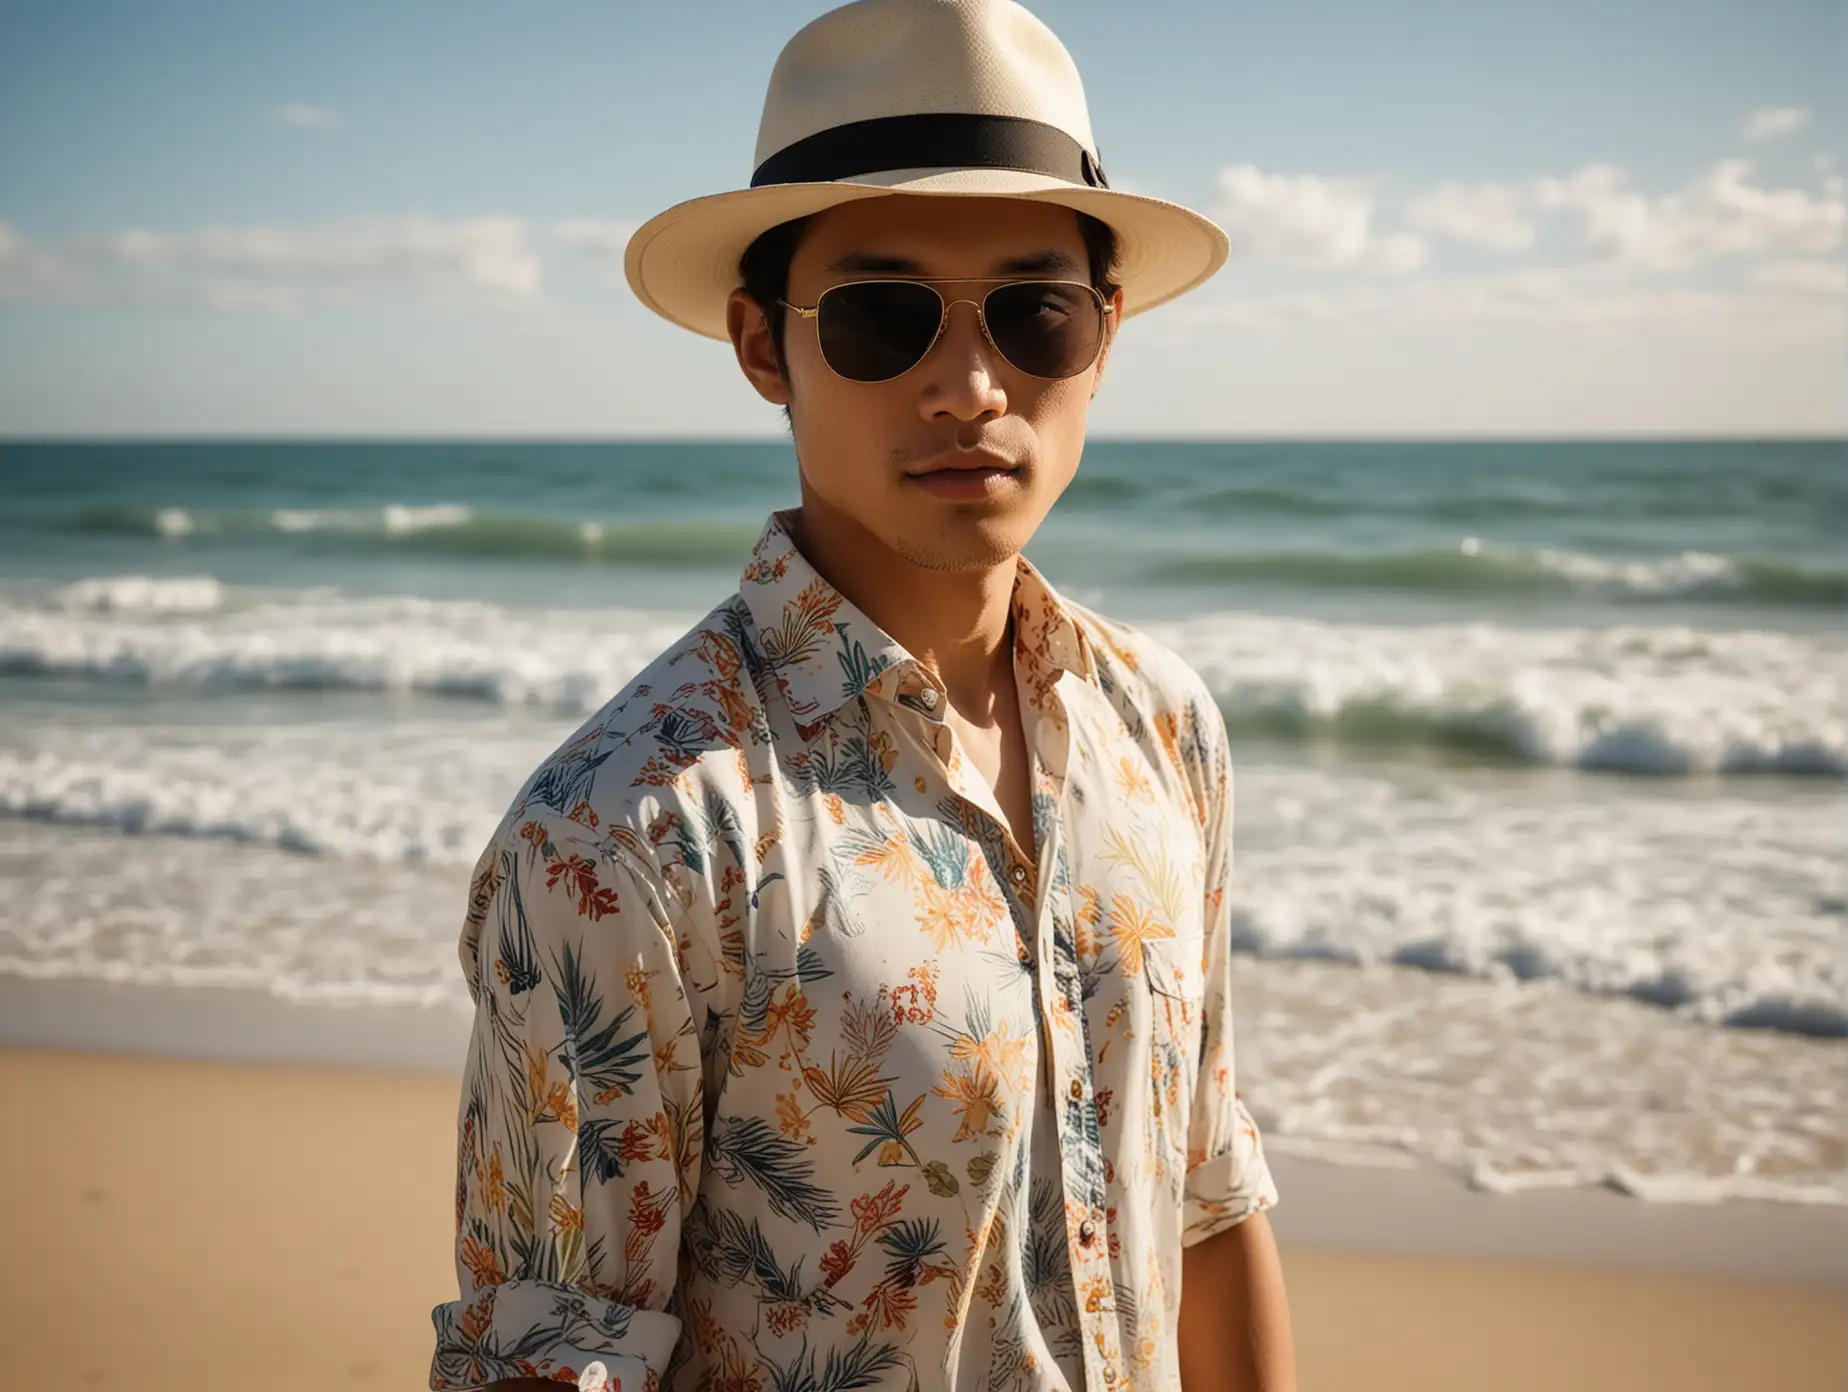 "a headshot portrait photograph captivating composition inspired by Annie Leibovitz's iconic style, showcasing a young asian man wears white fedora hat, beach hawai-motive colorful shirt, walking gracefully on the sandy shores of a sun-drenched beach. With the Sigma 85mm 1.4F lens, capture him delicately holding his sunglasses with his fingers, adding an element of contemplation to the scene against the backdrop of the serene ocean waves."